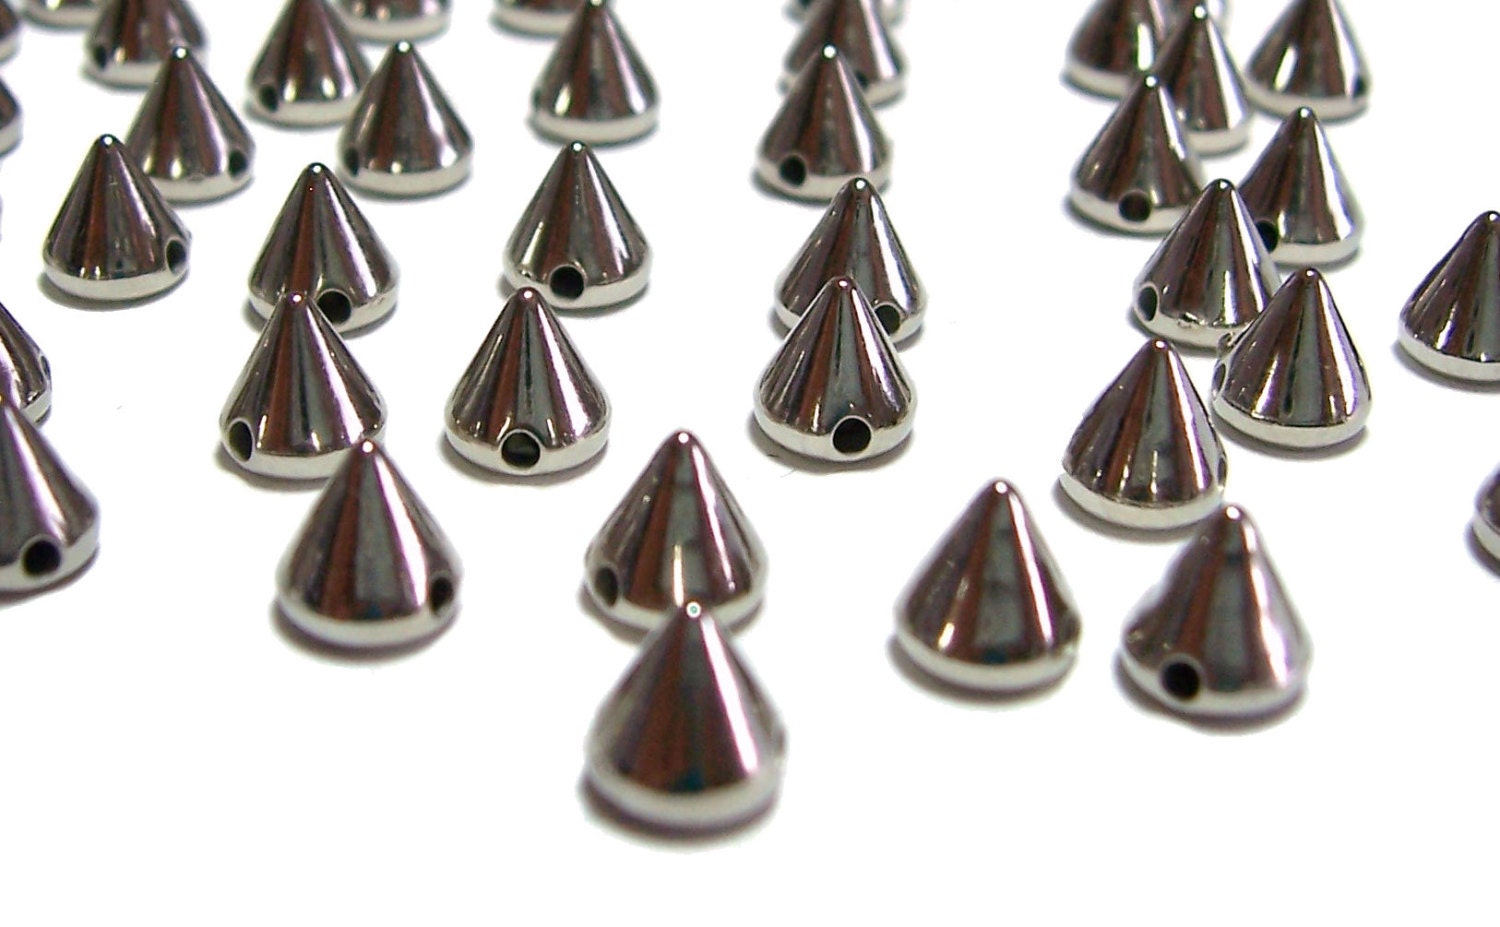  170 Pieces Multiple Sizes Cone Spikes Screwback Studs Rivets  Large Medium Small Metal Tree Spikes Studs for Punk Style Clothing  Accessories DIY Craft Decoration (Silver) : Arts, Crafts & Sewing